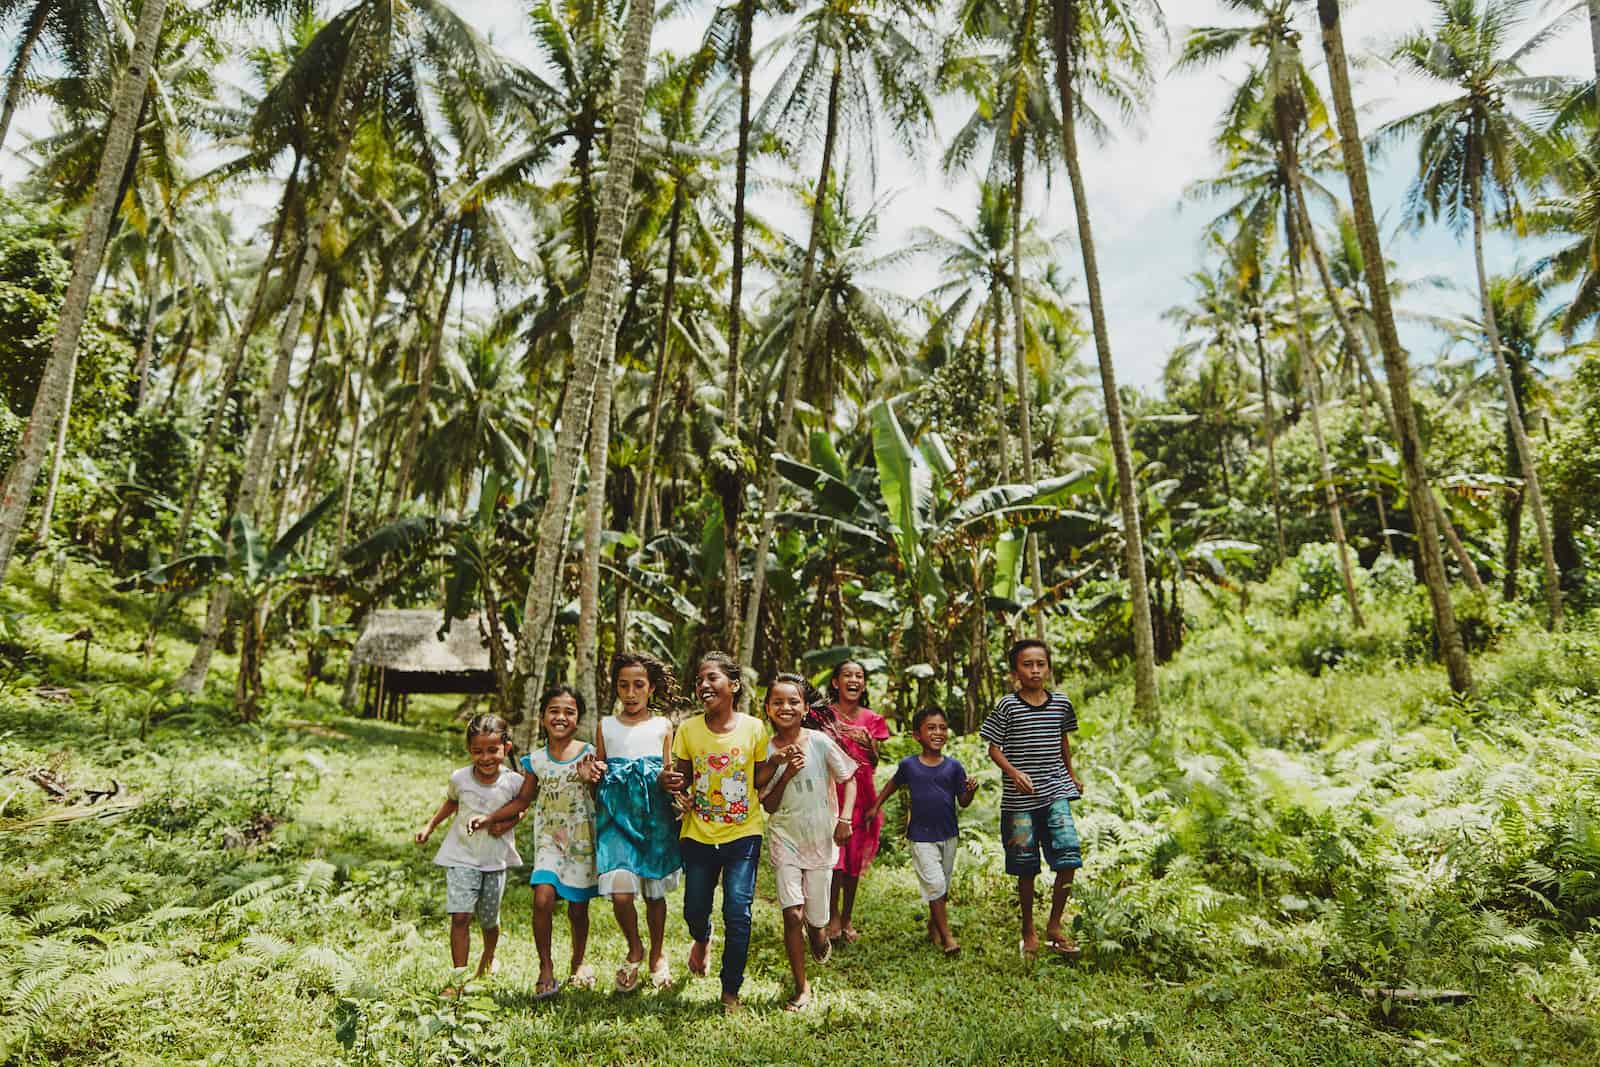 A group of children run through green grass in a forest of palm trees in Indonesia.